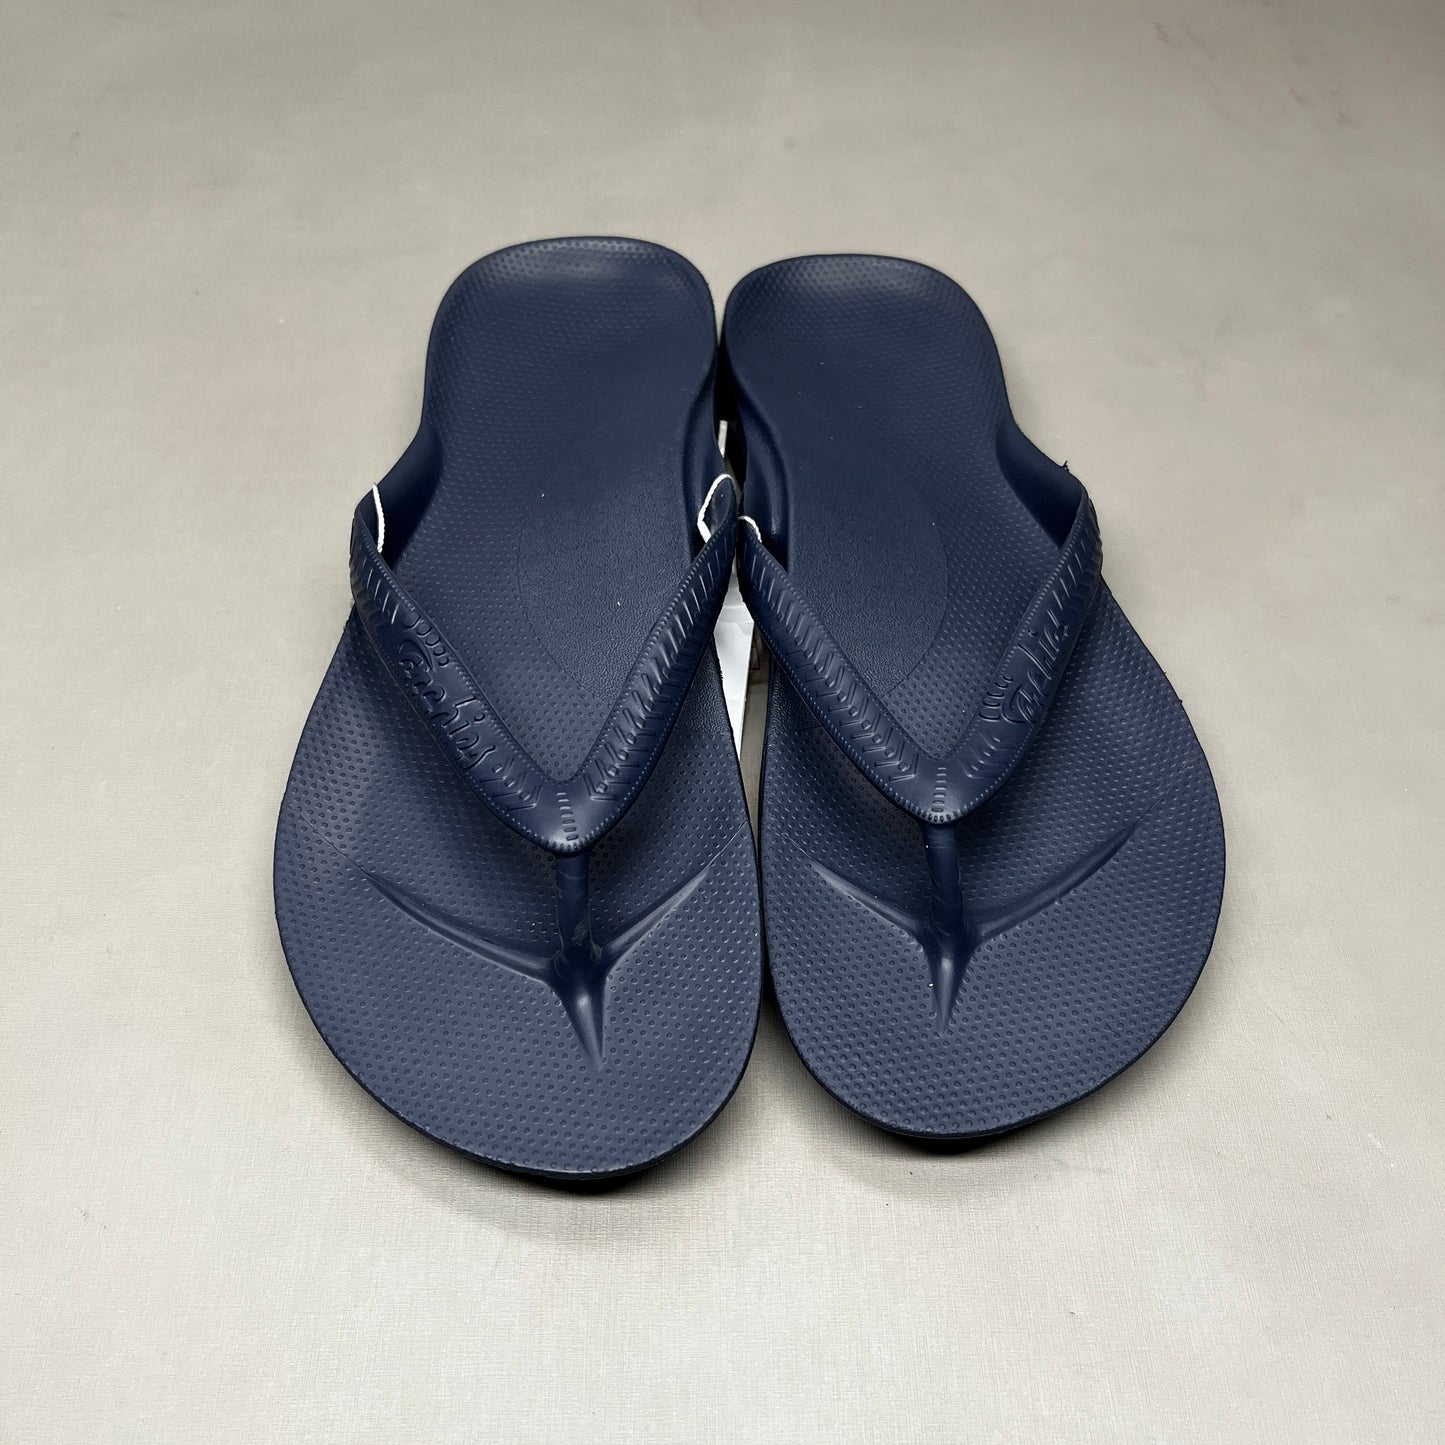 ARCHIES Arch Support Thongs HIGH SUPPORT Flip Flops Men's Sz 15 Navy Blue (New)